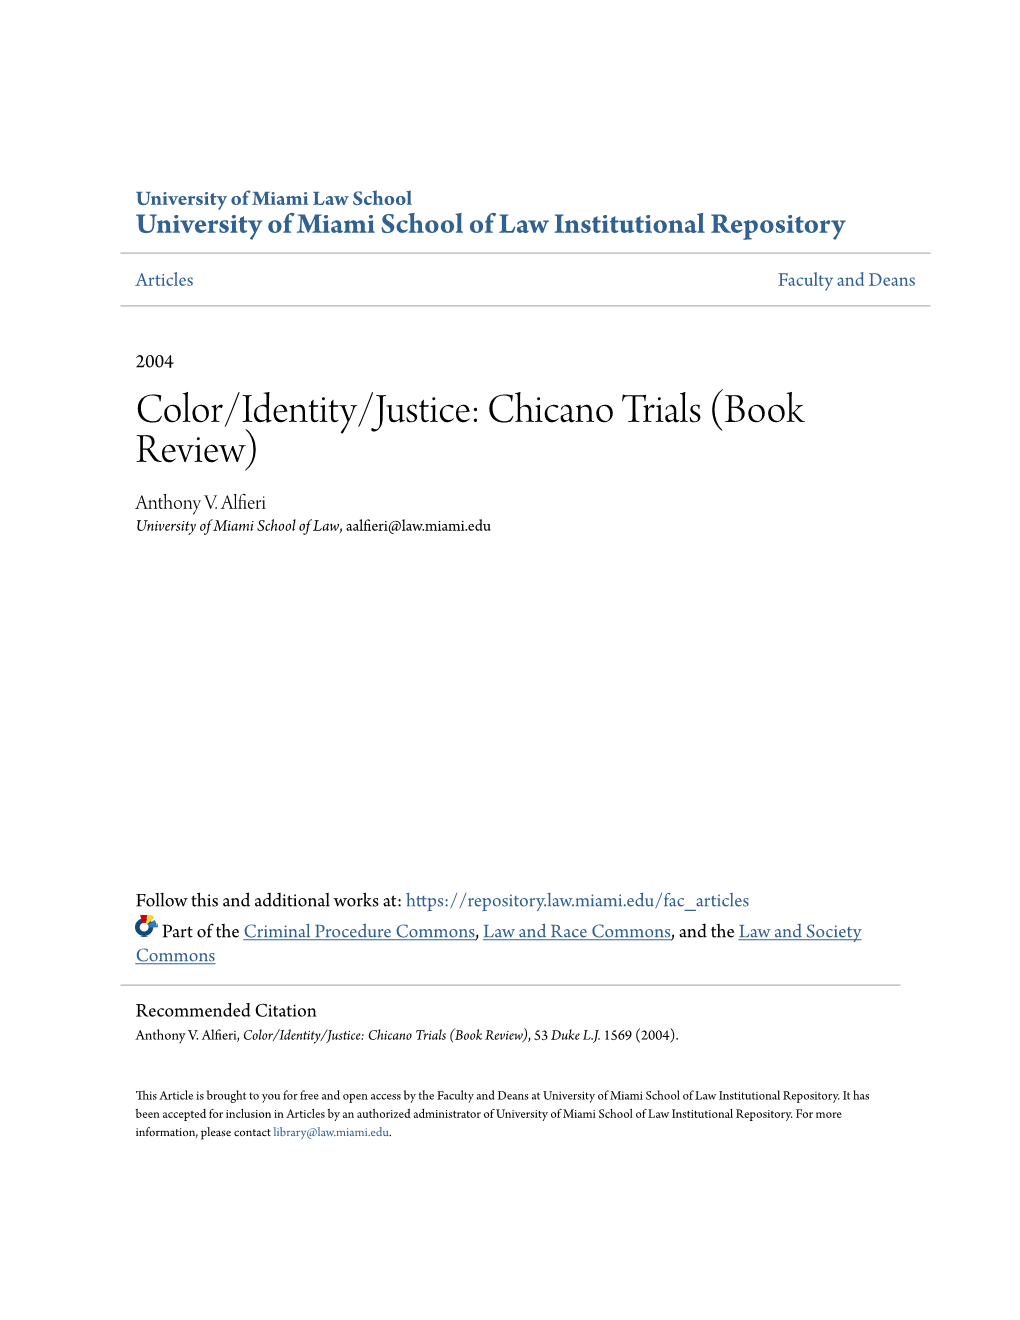 Color/Identity/Justice: Chicano Trials (Book Review) Anthony V